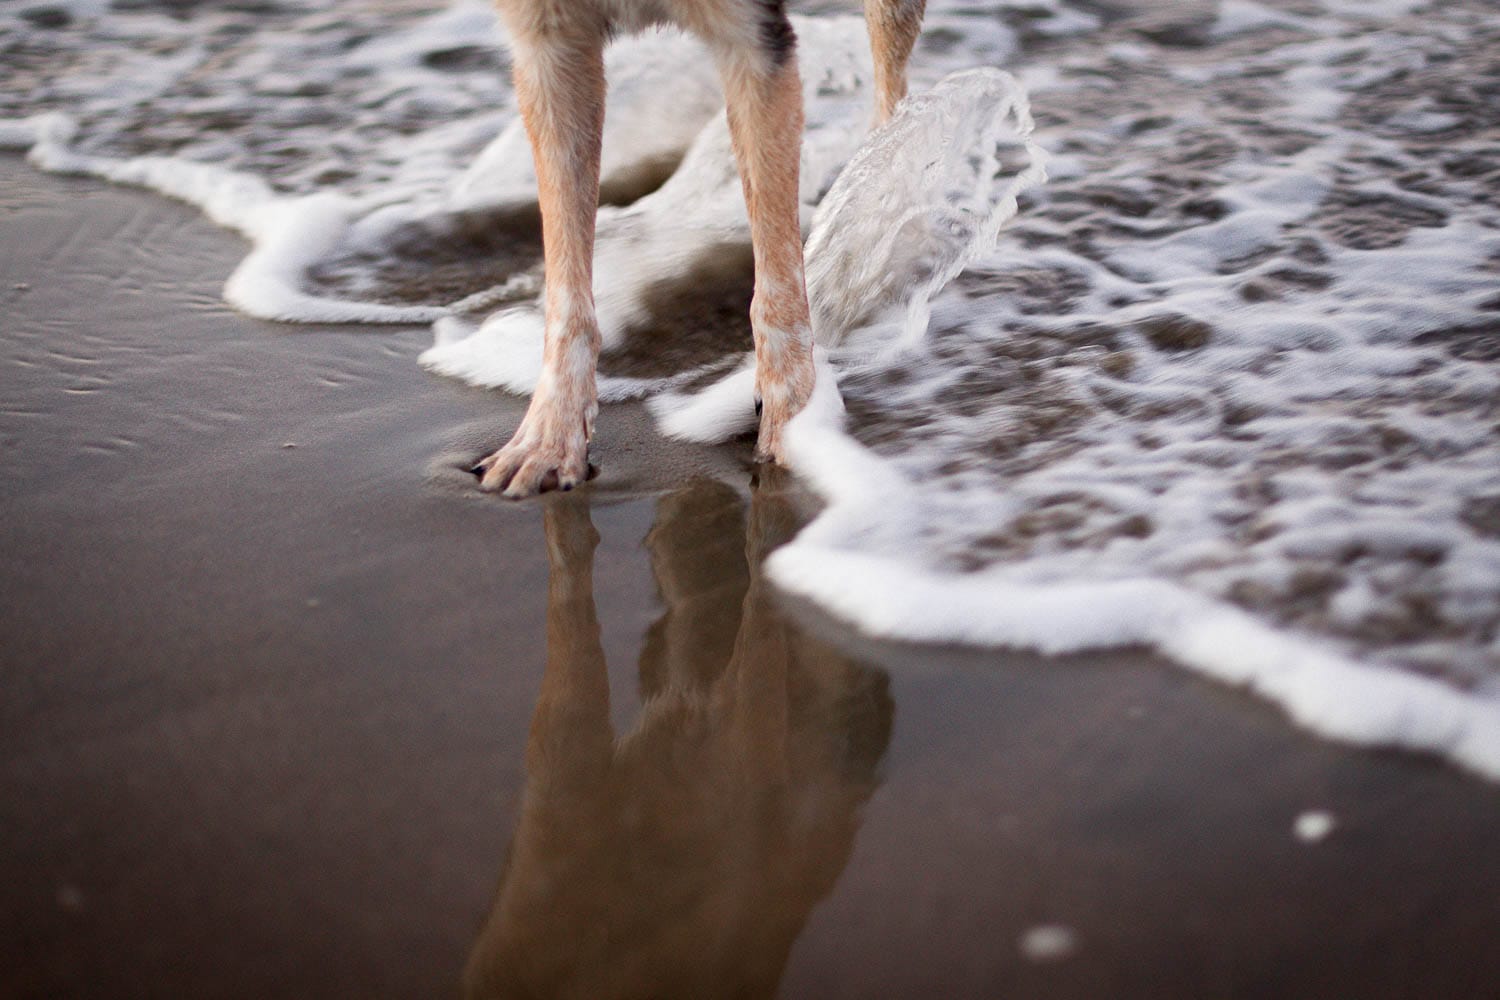 A dog's paws and lower legs on a wet sandy beach with a wave's foam touching them.